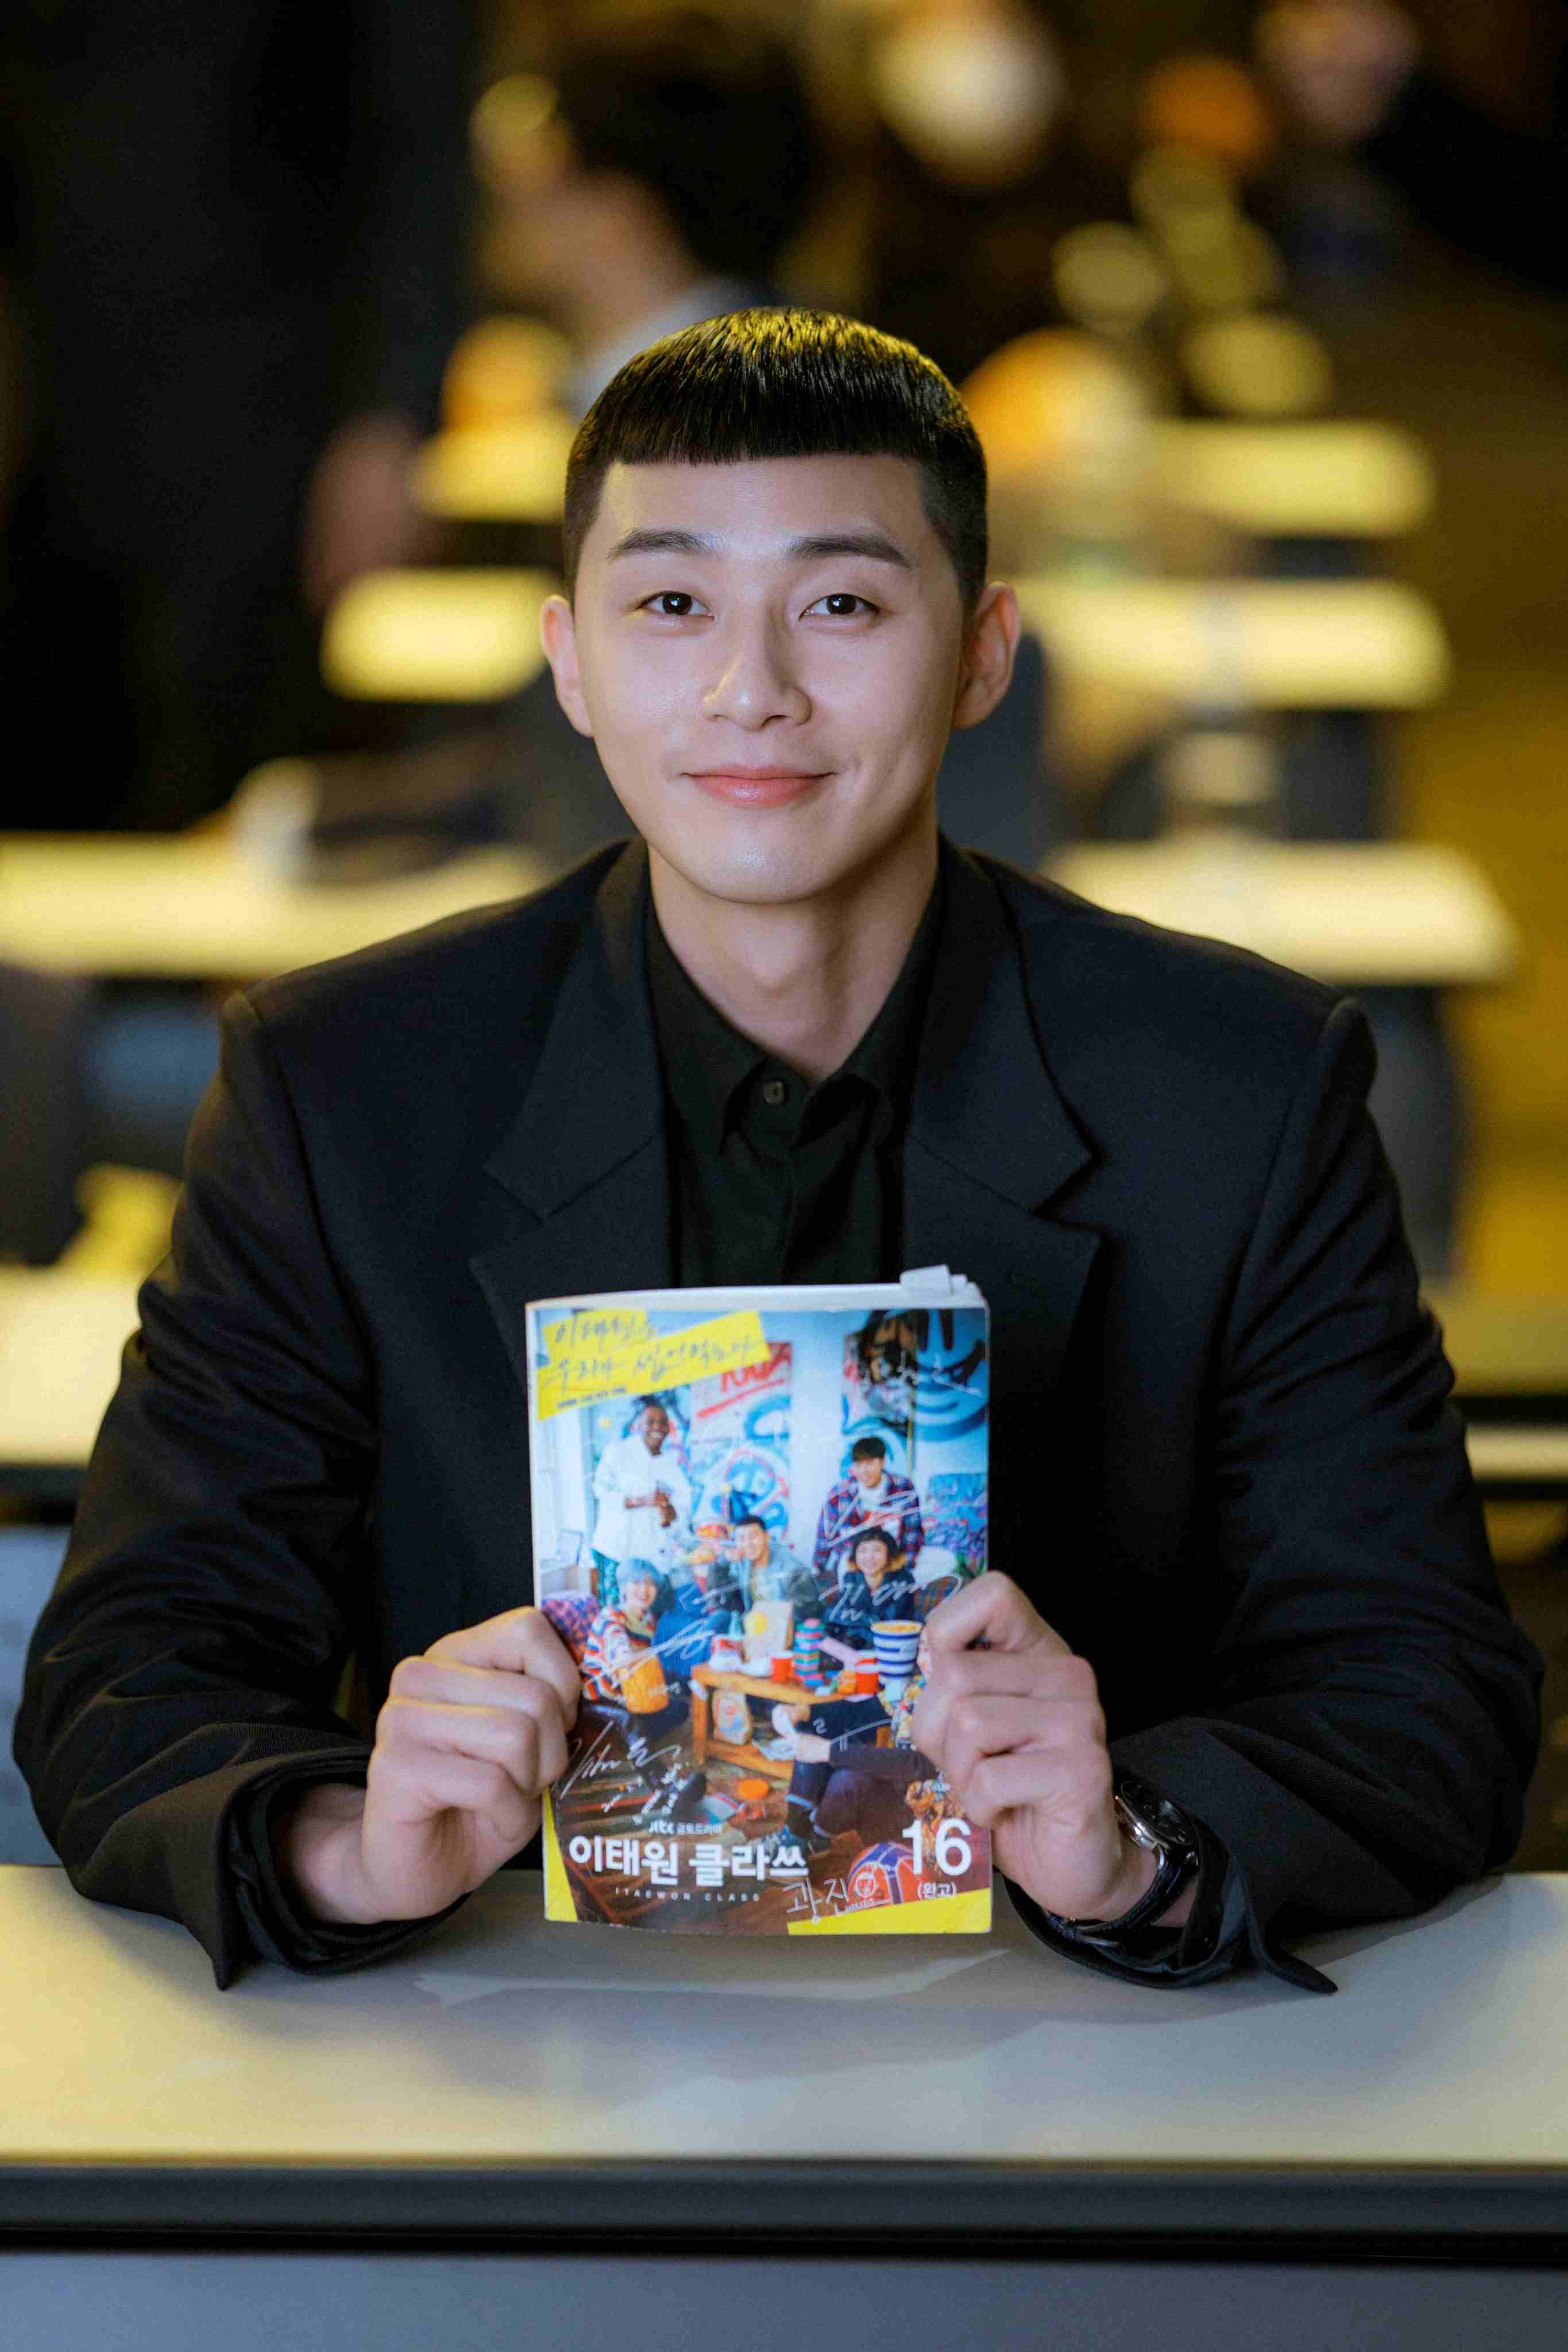 Korean actor Park Seo-joon in the Netflix Korean drama “Itaewon Class”. Park will make his Hollywood debut later this year in “The Marvels”, alongside Brie Larsen.